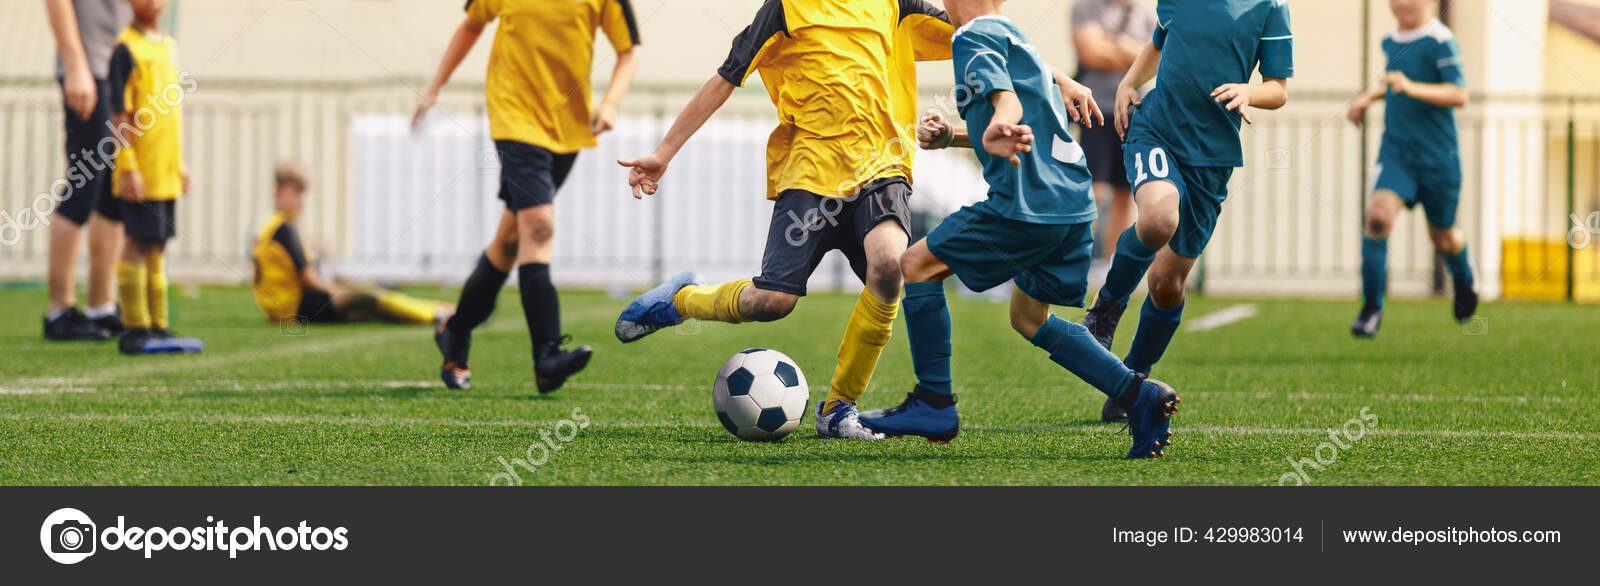 Young Football Players Kicking Ball on Soccer Field. Soccer